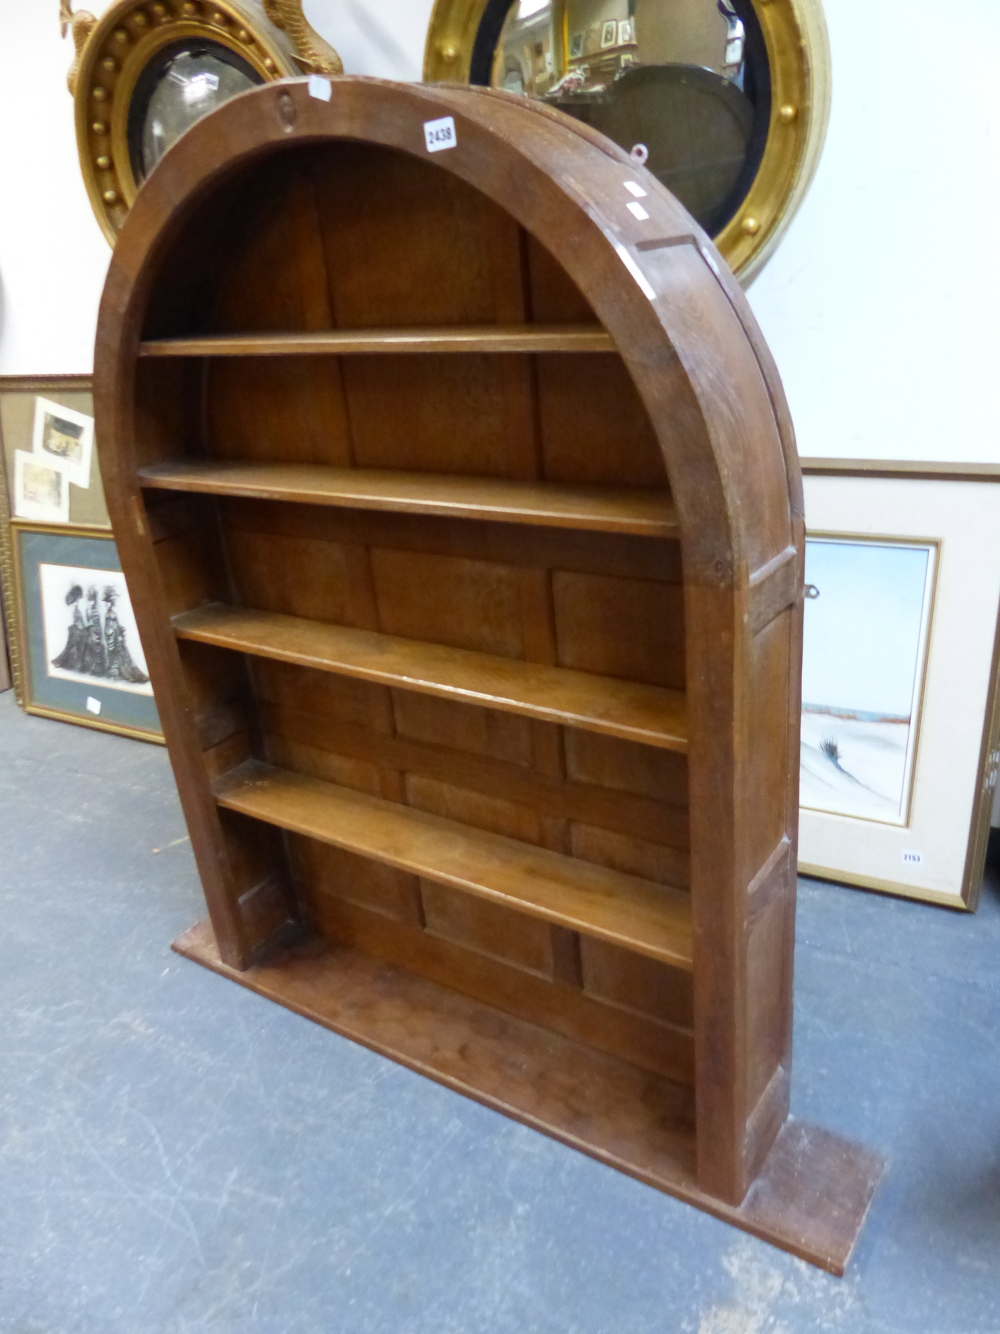 AN ARTS AND CRAFTS ACORN MAN OAK PANEL BACK ARCHED TOP BOOKCASE WITH ADZE FINISH. W.93 x D.17 x H. - Image 6 of 14